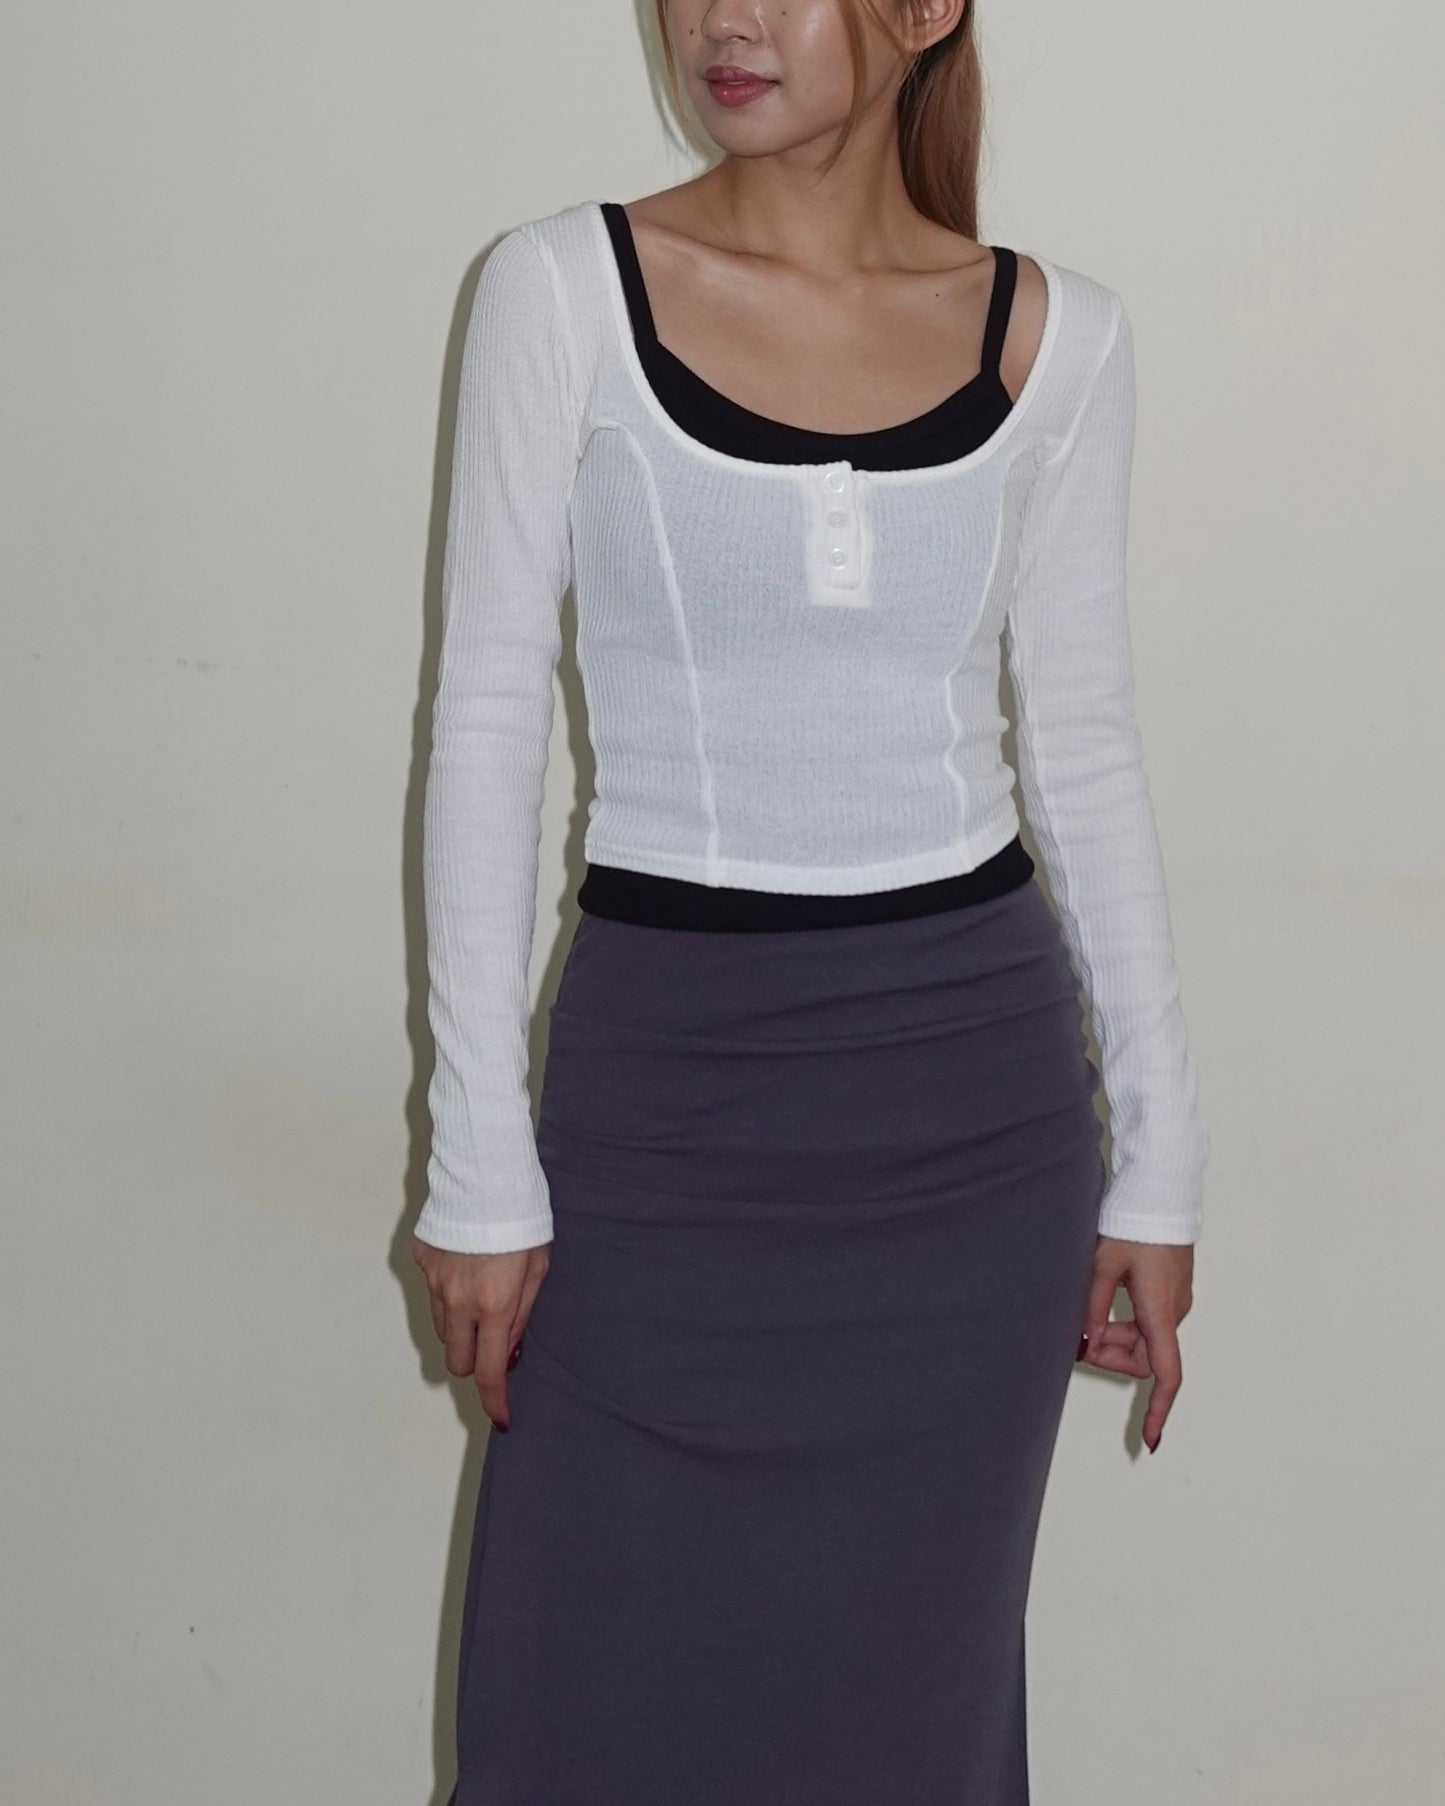 Square neck crop top with button detail